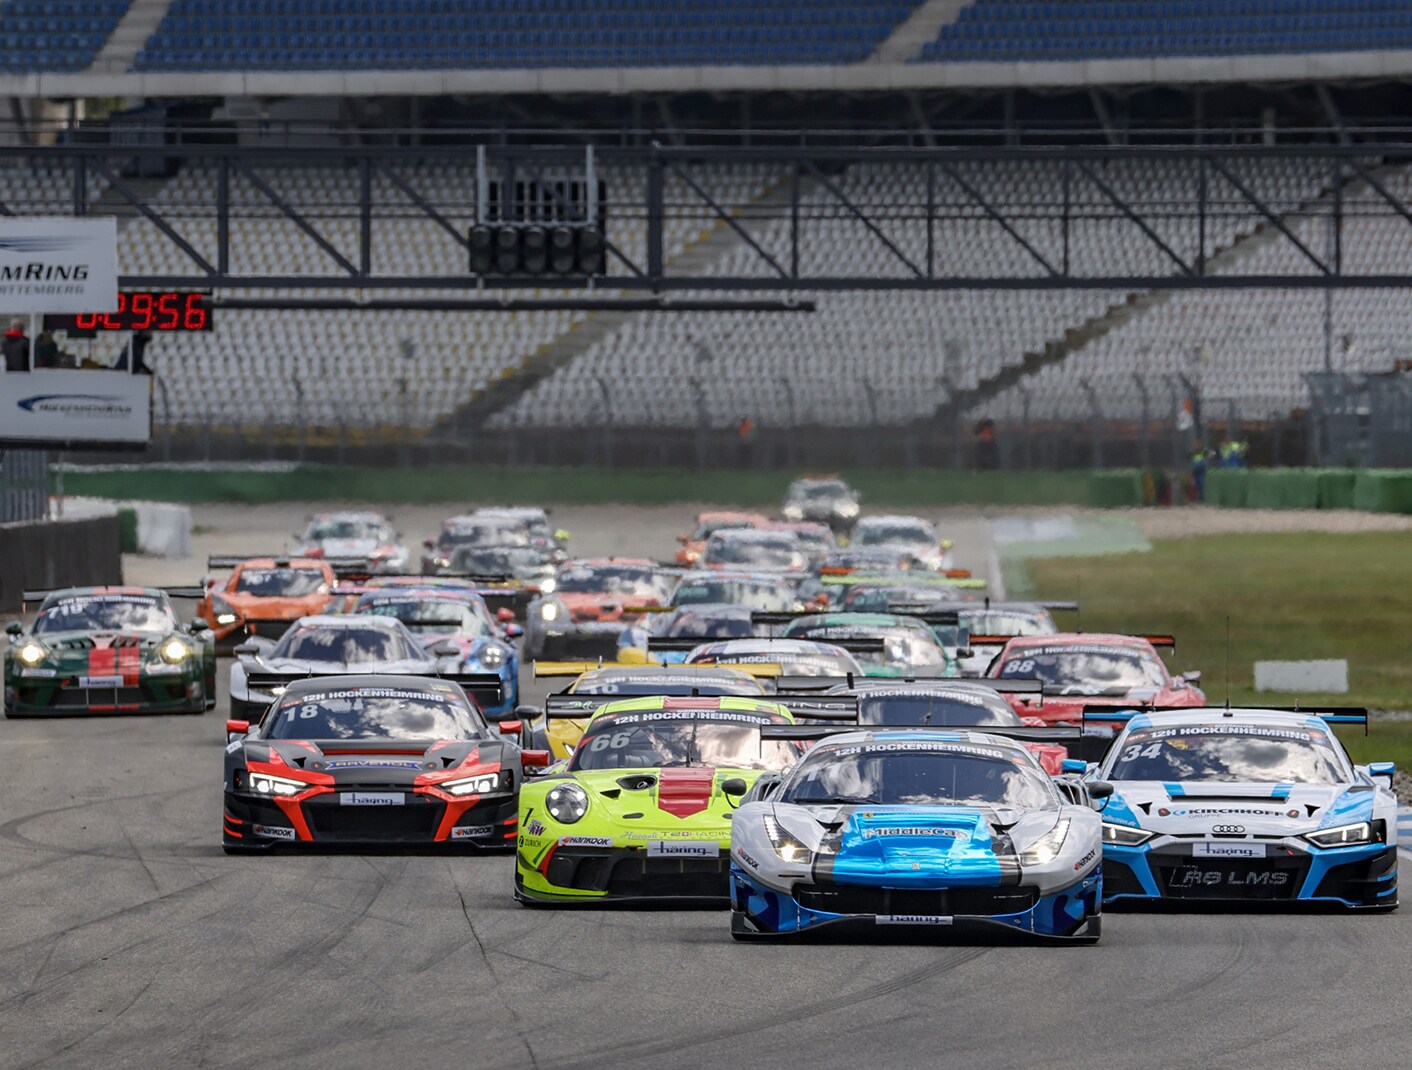 24H Series powered by Hankook reaches the halfway point at the Hockenheimring